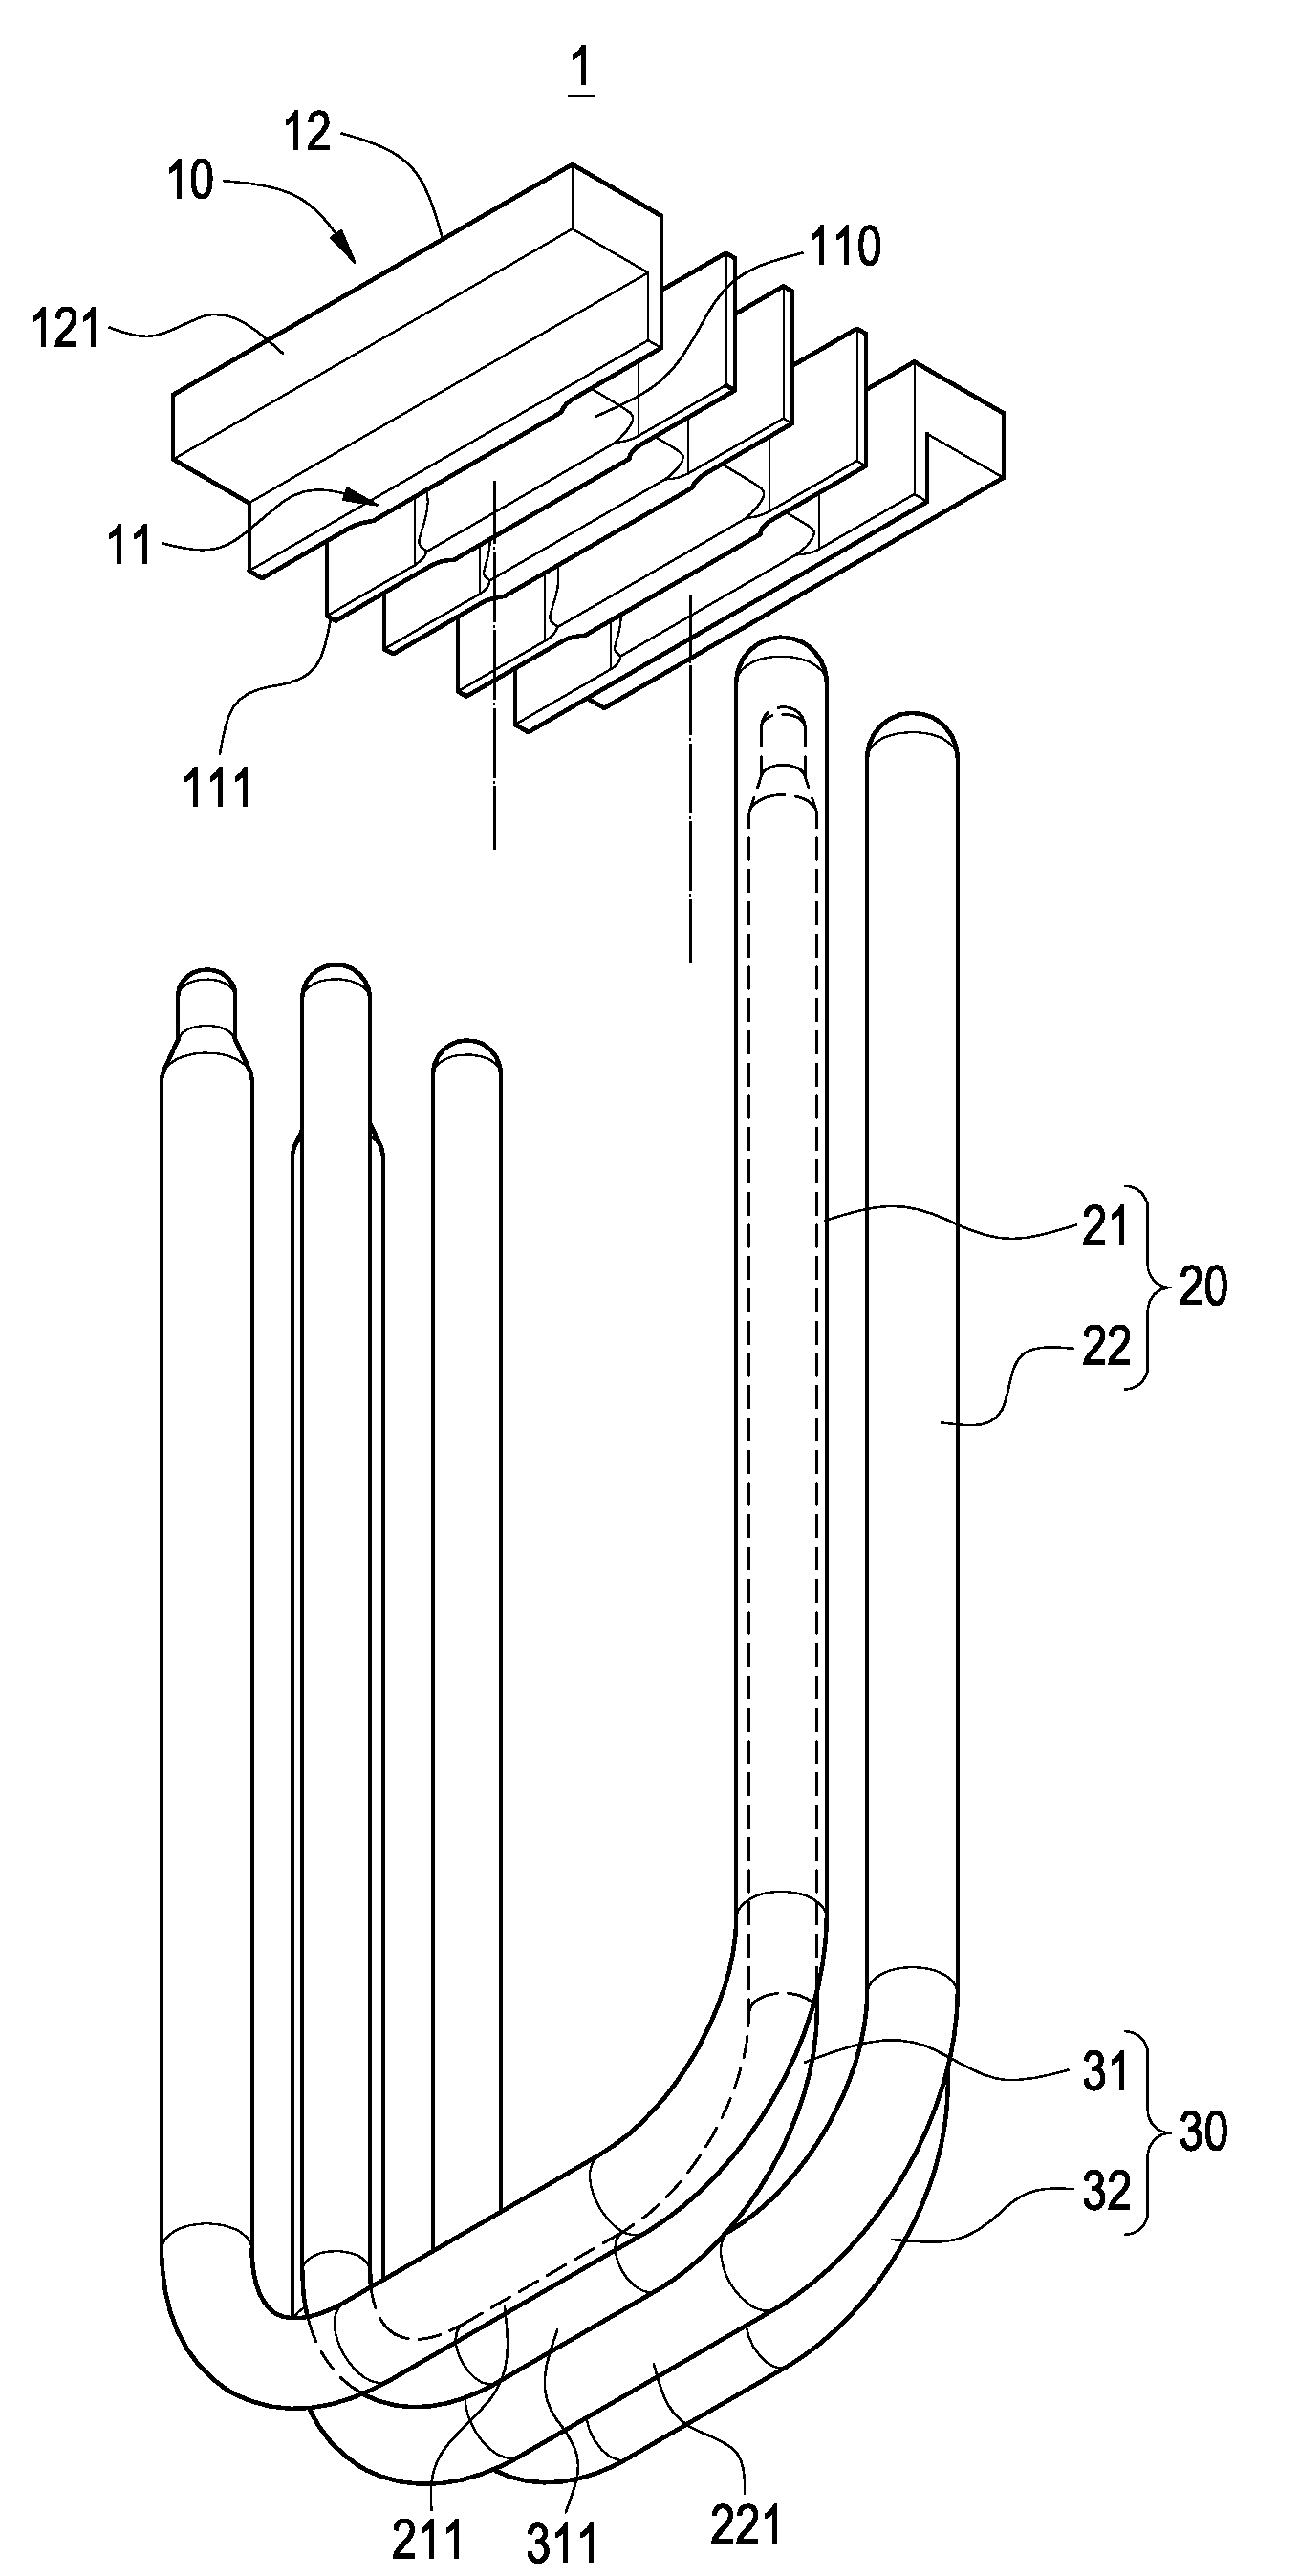 Heat-conducting assembly for heat pipes of different diameters and heat sink having the same